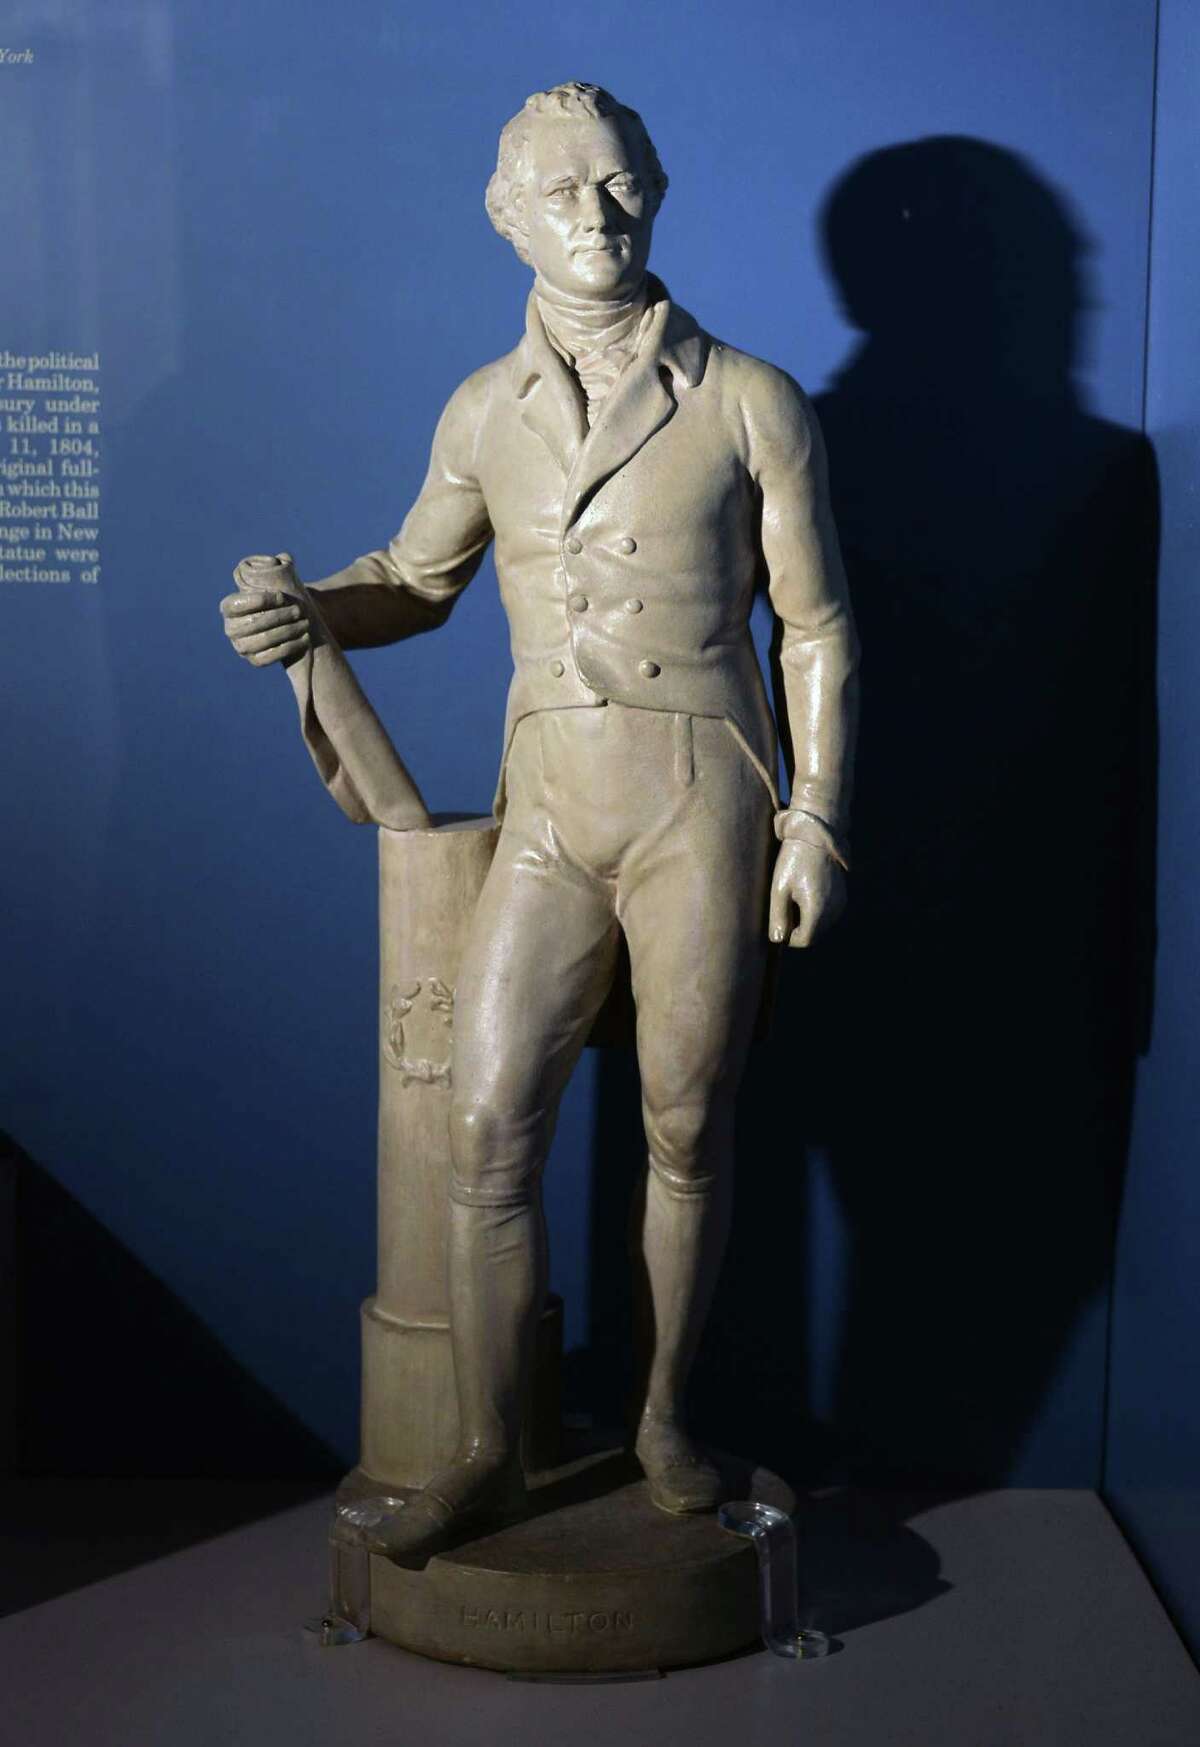 A small copy of Robert Ball Hughes' full size statue of Alexander Hamilton on display at the Visitor's Center at Schuyler Mansion Thursday Jan. 28, 2016 in Albany, NY. The original statue was destroyed in a fire in 1836. (John Carl D'Annibale / Times Union)